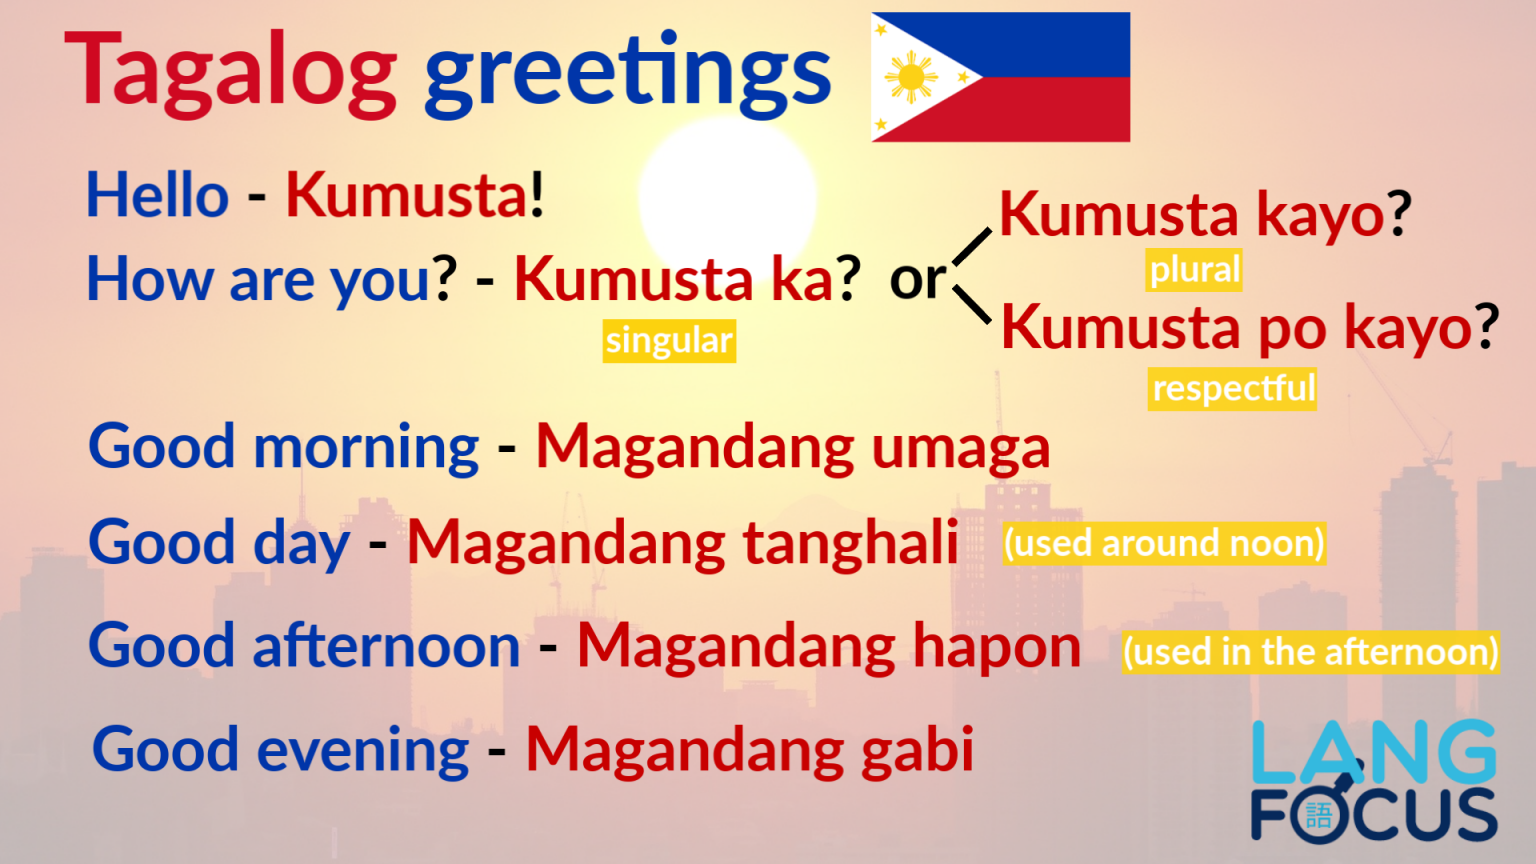 annotation meaning in tagalog